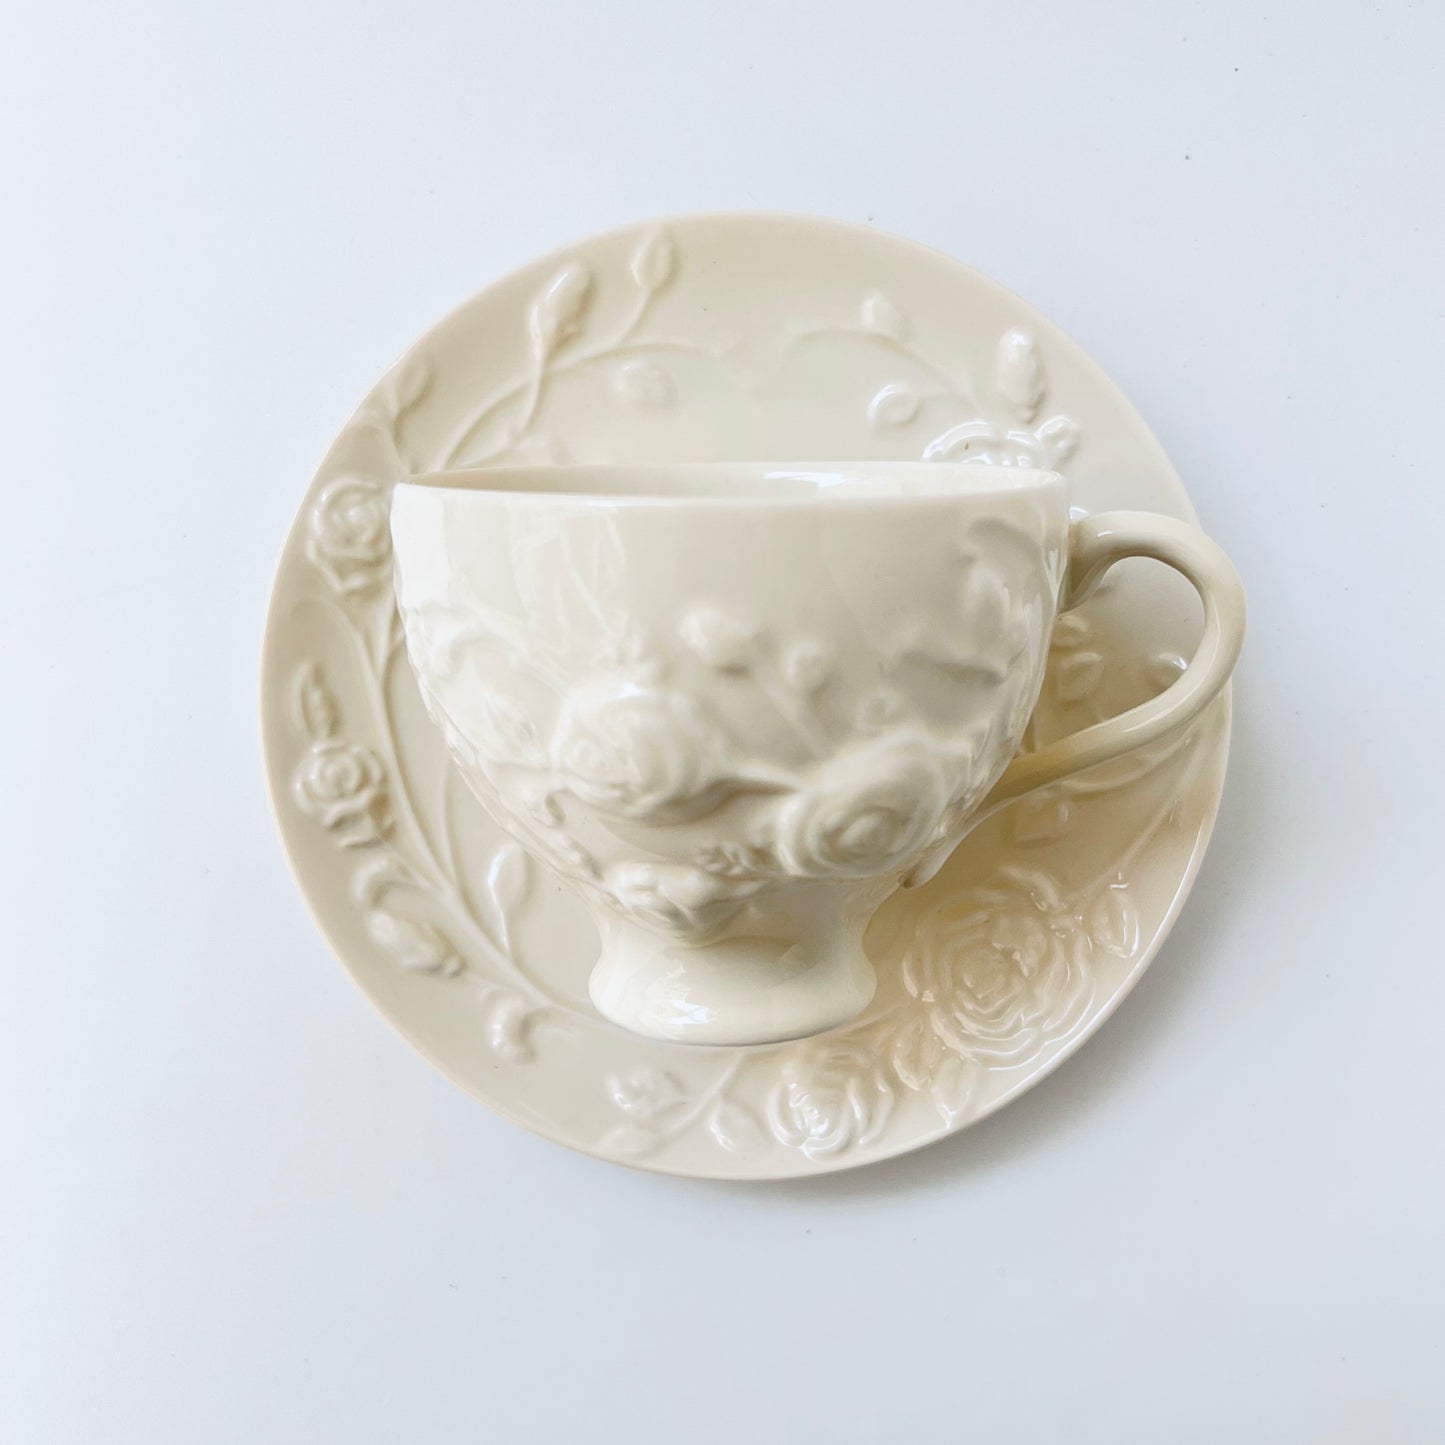 European Embossed Tea Cup and Saucer